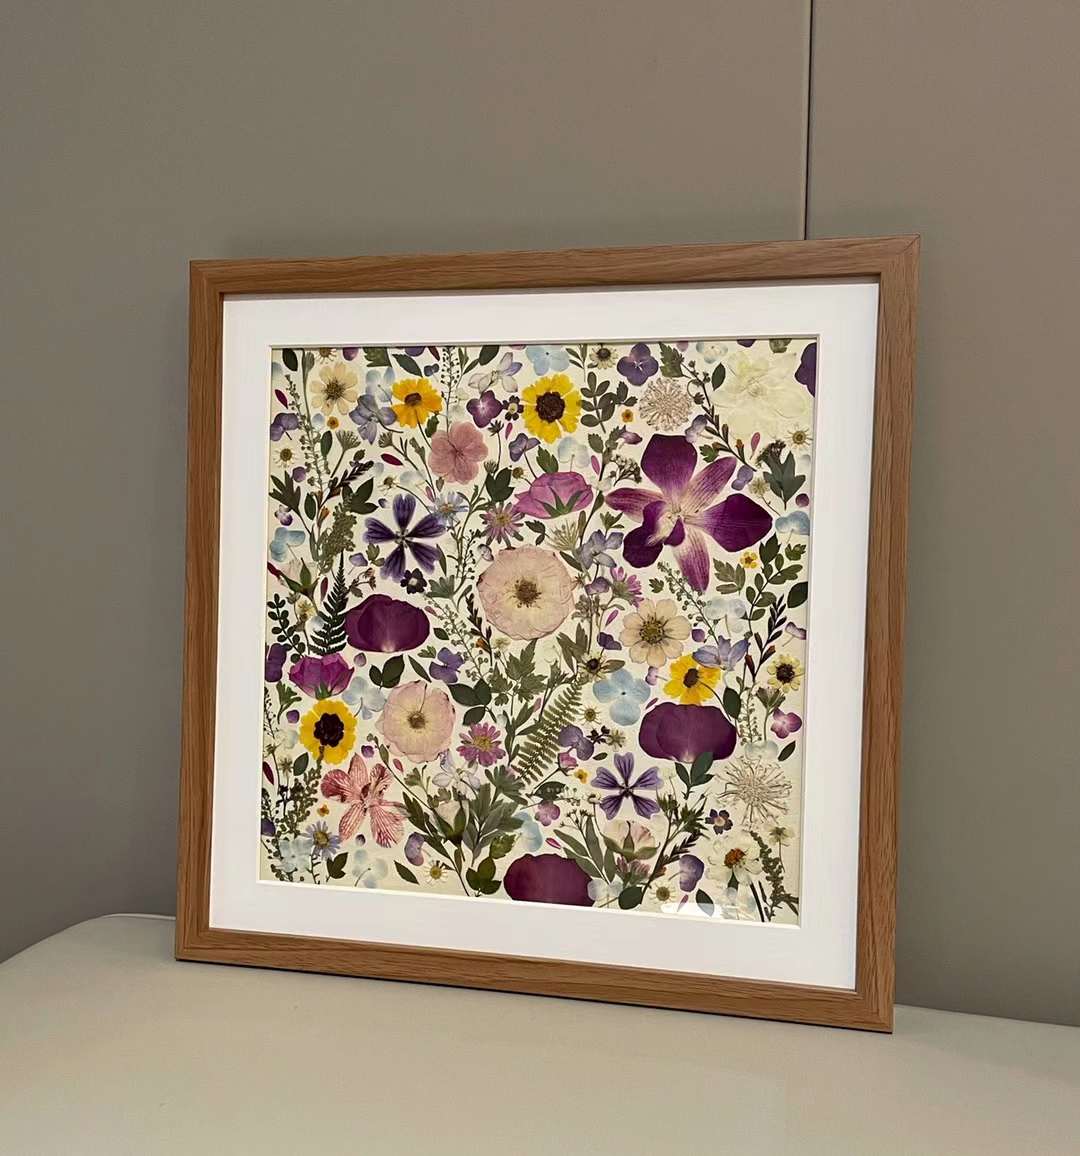 15.7 inch width 15.7 inch height pressed flower frame art that has vibrant and colorful petals formed design.